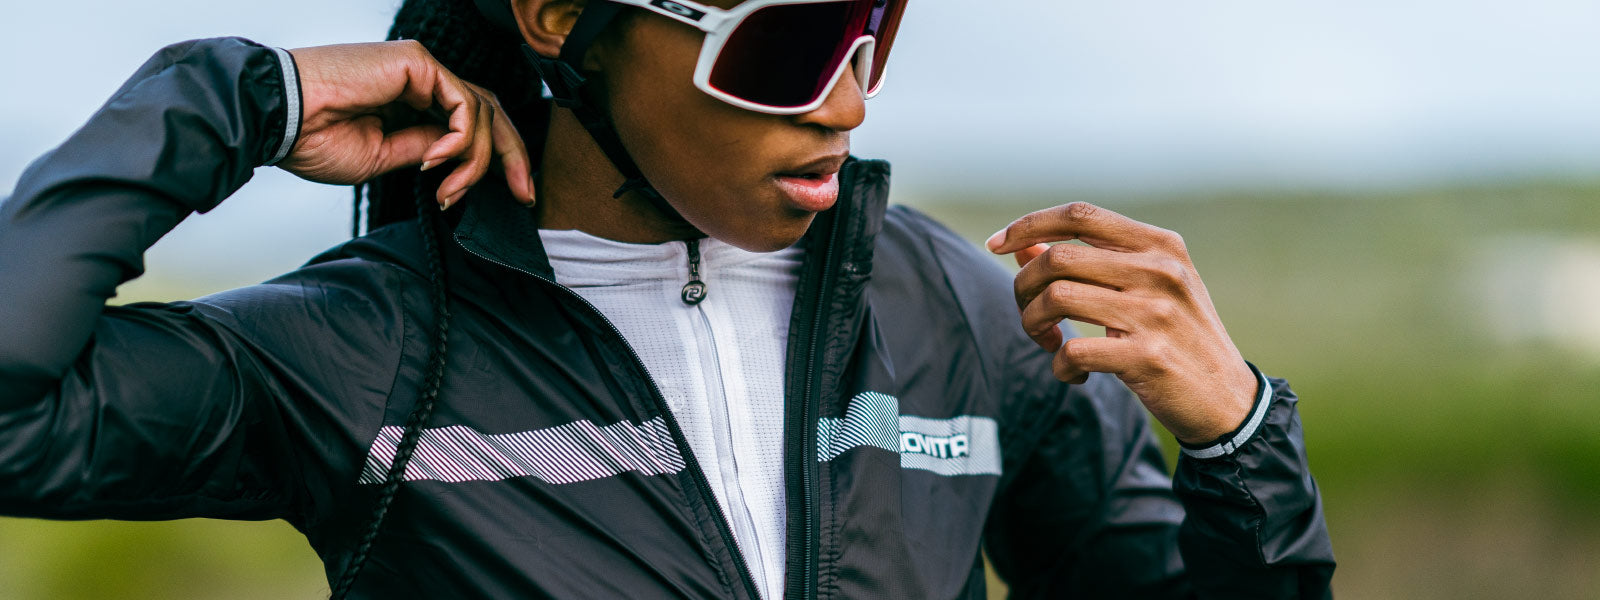 Windproof Cycling Jackets